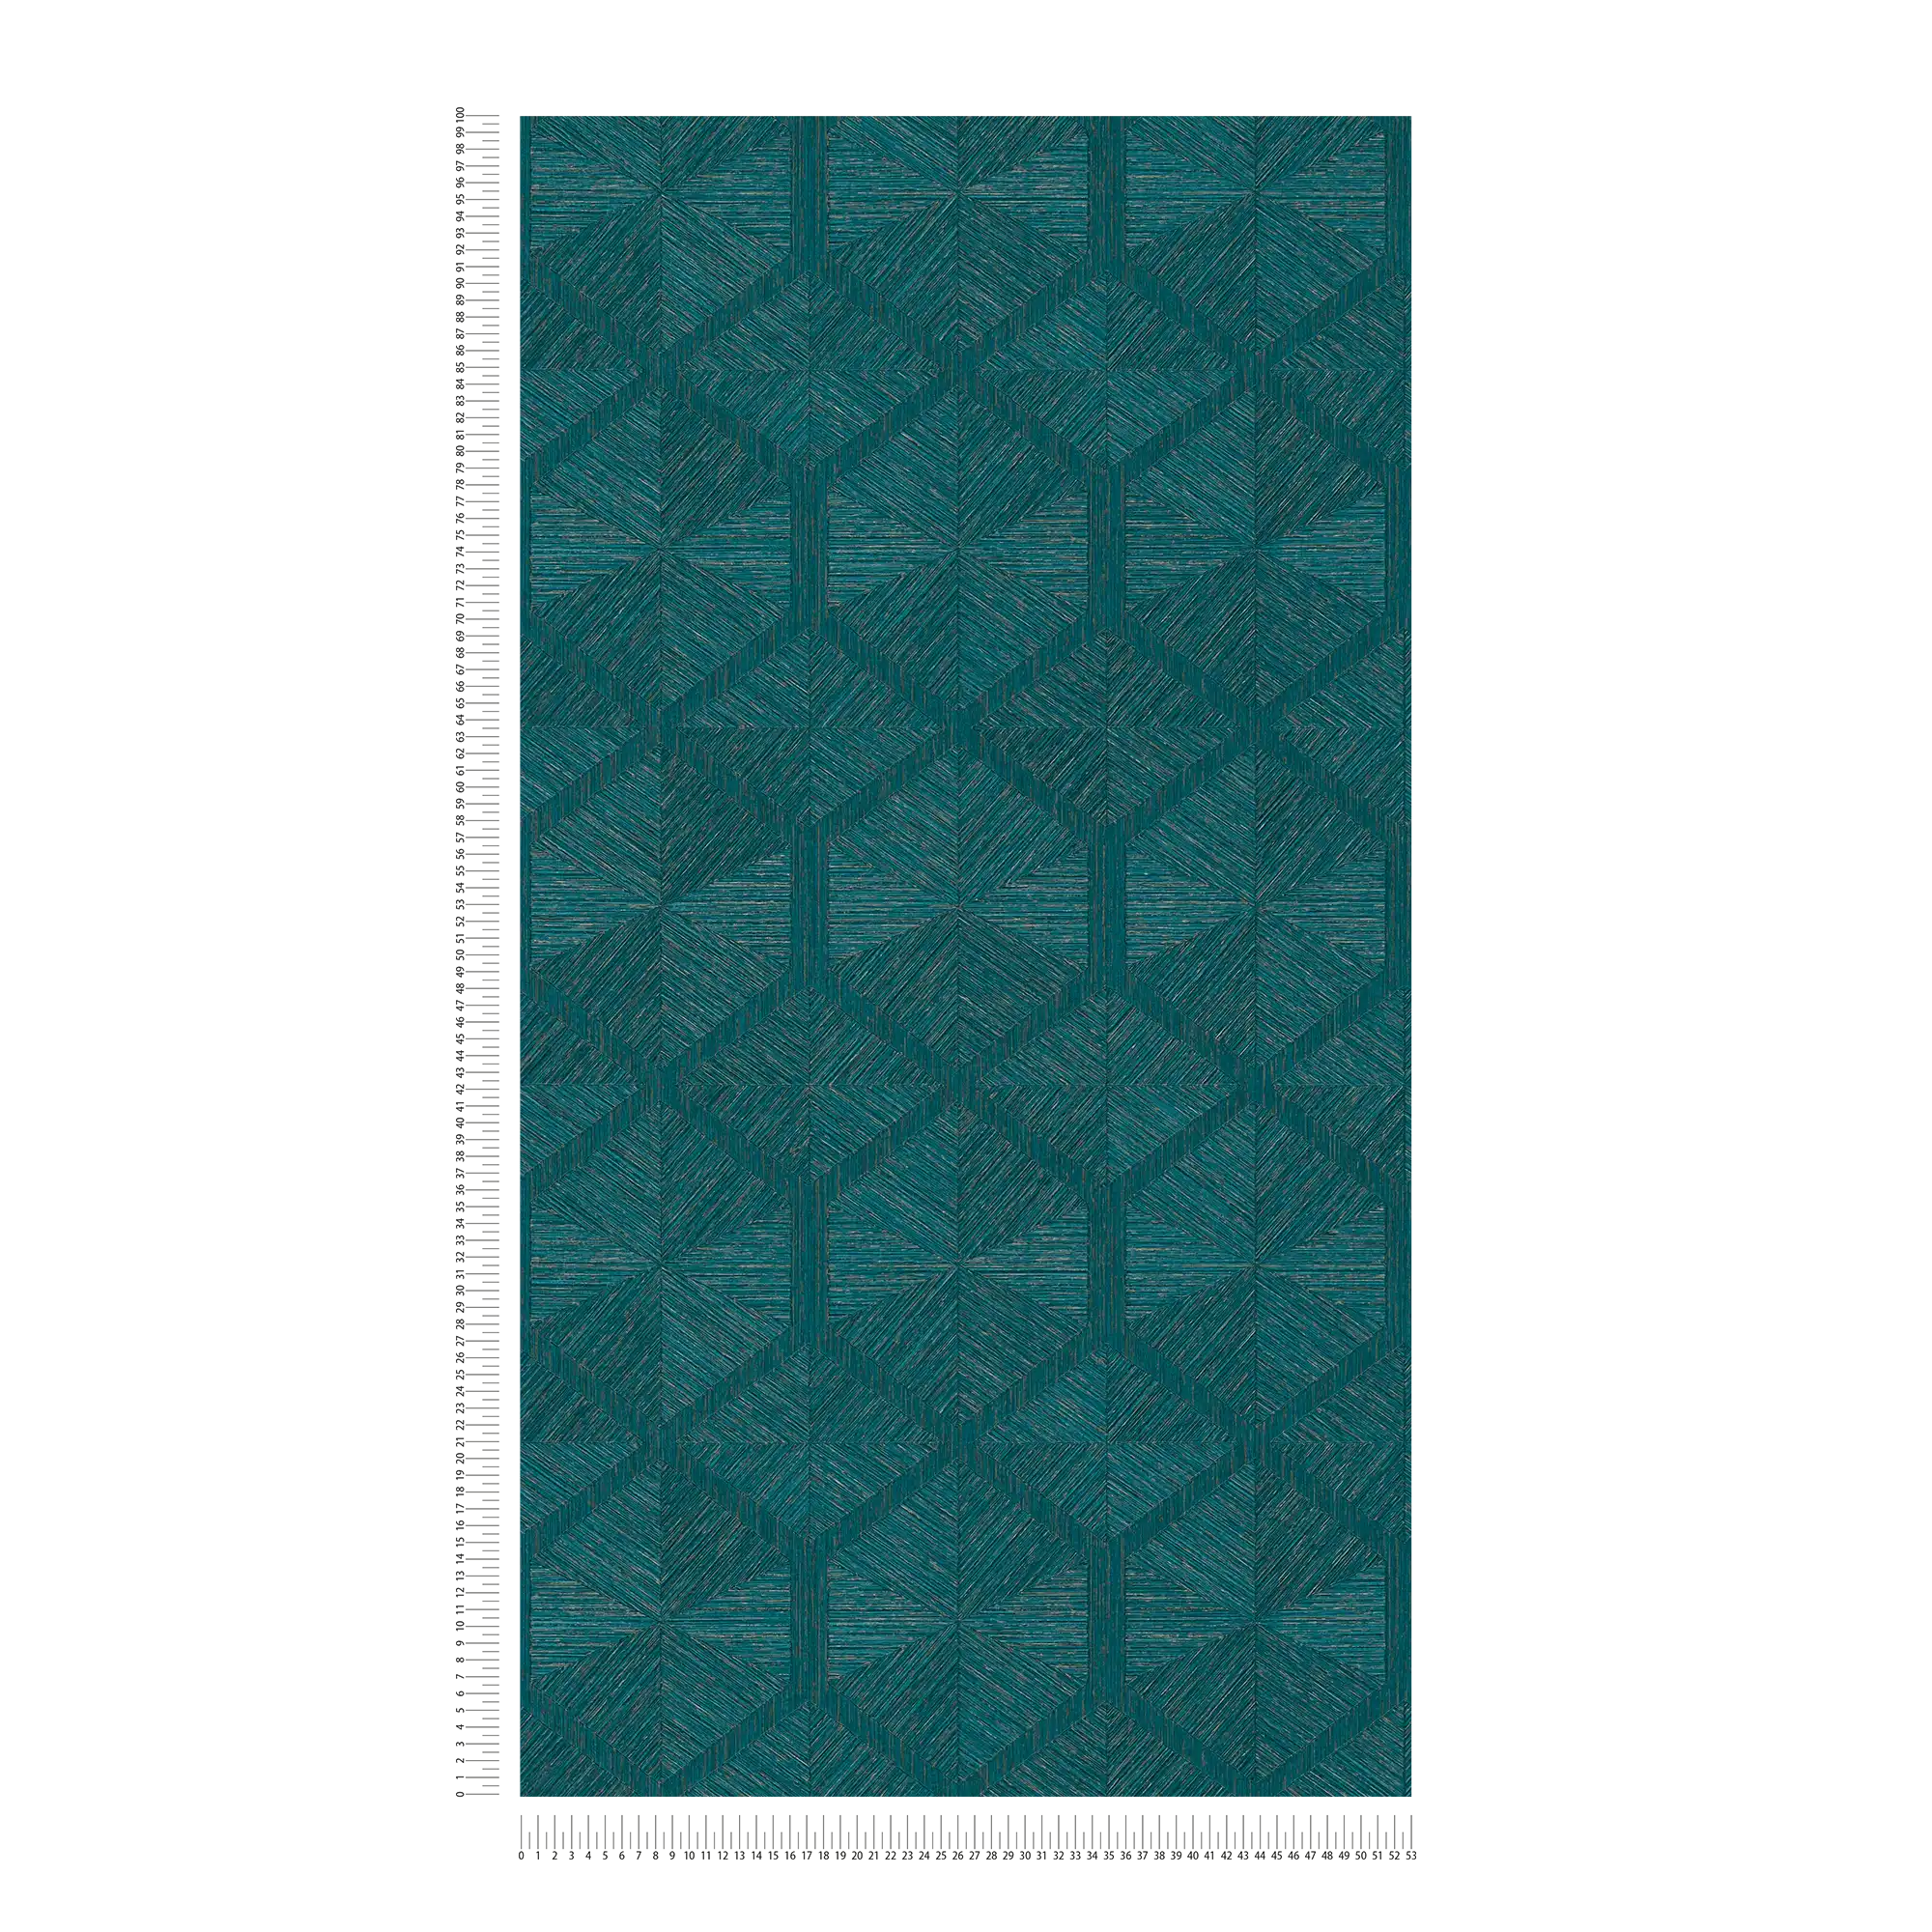             Non-woven wallpaper petrol blue with gold accent and graphic pattern - blue, metallic
        